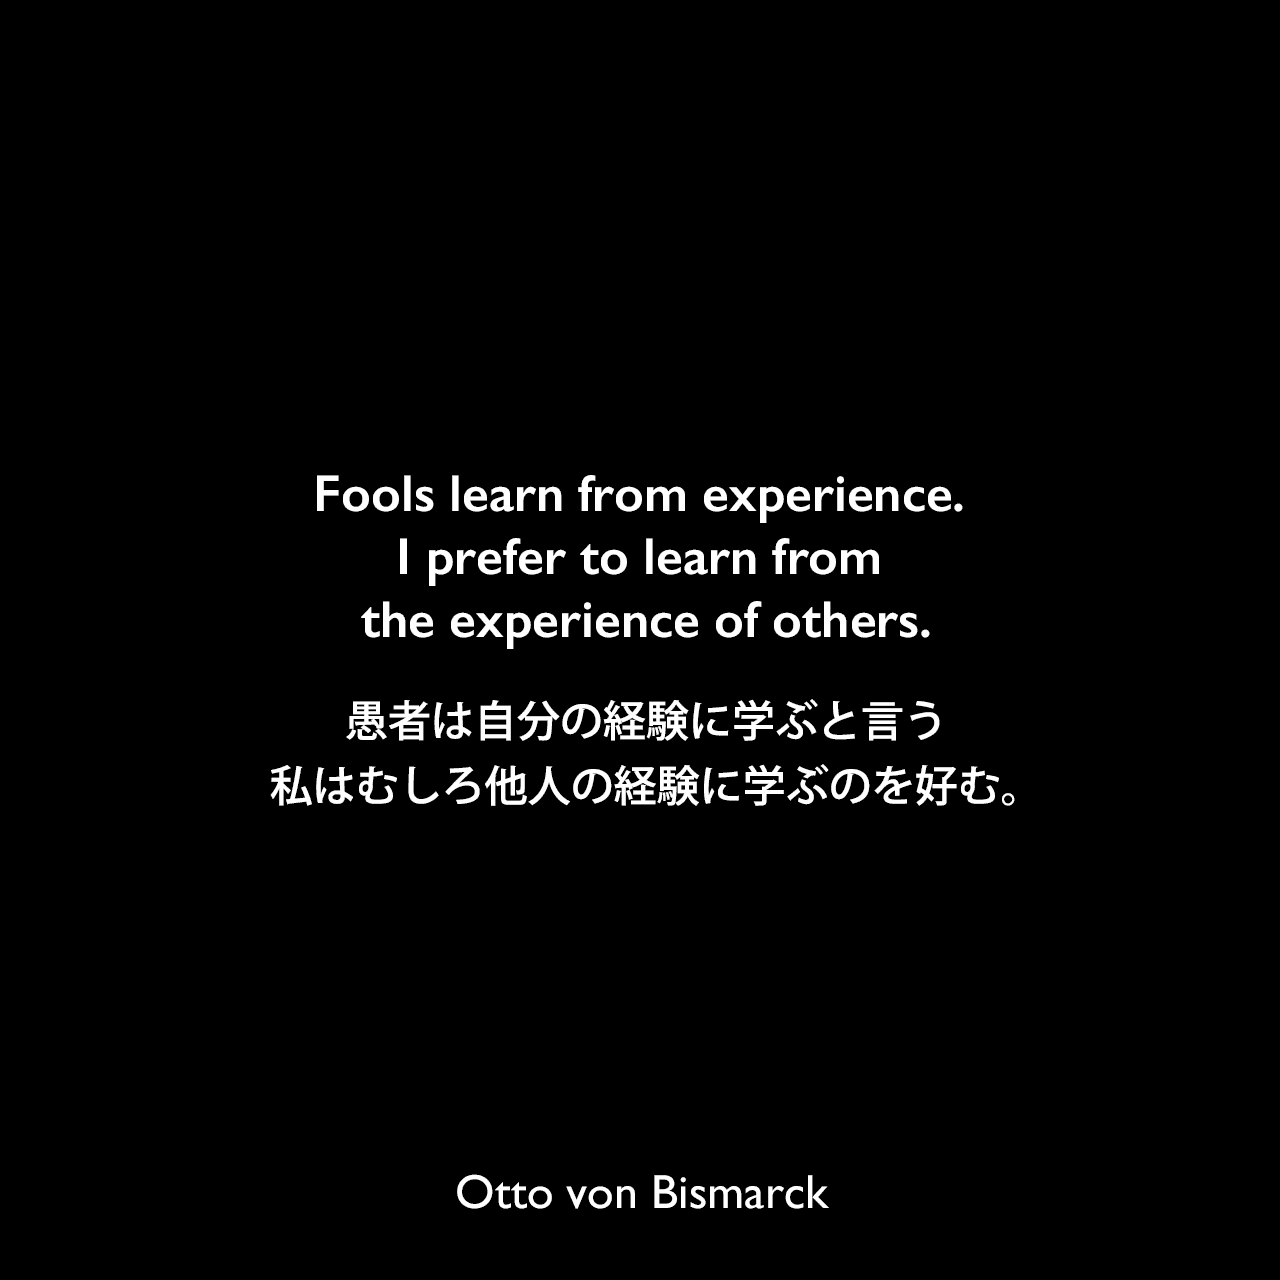 Fools learn from experience. I prefer to learn from the experience of others.愚者は自分の経験に学ぶと言う、私はむしろ他人の経験に学ぶのを好む。Otto von Bismarck